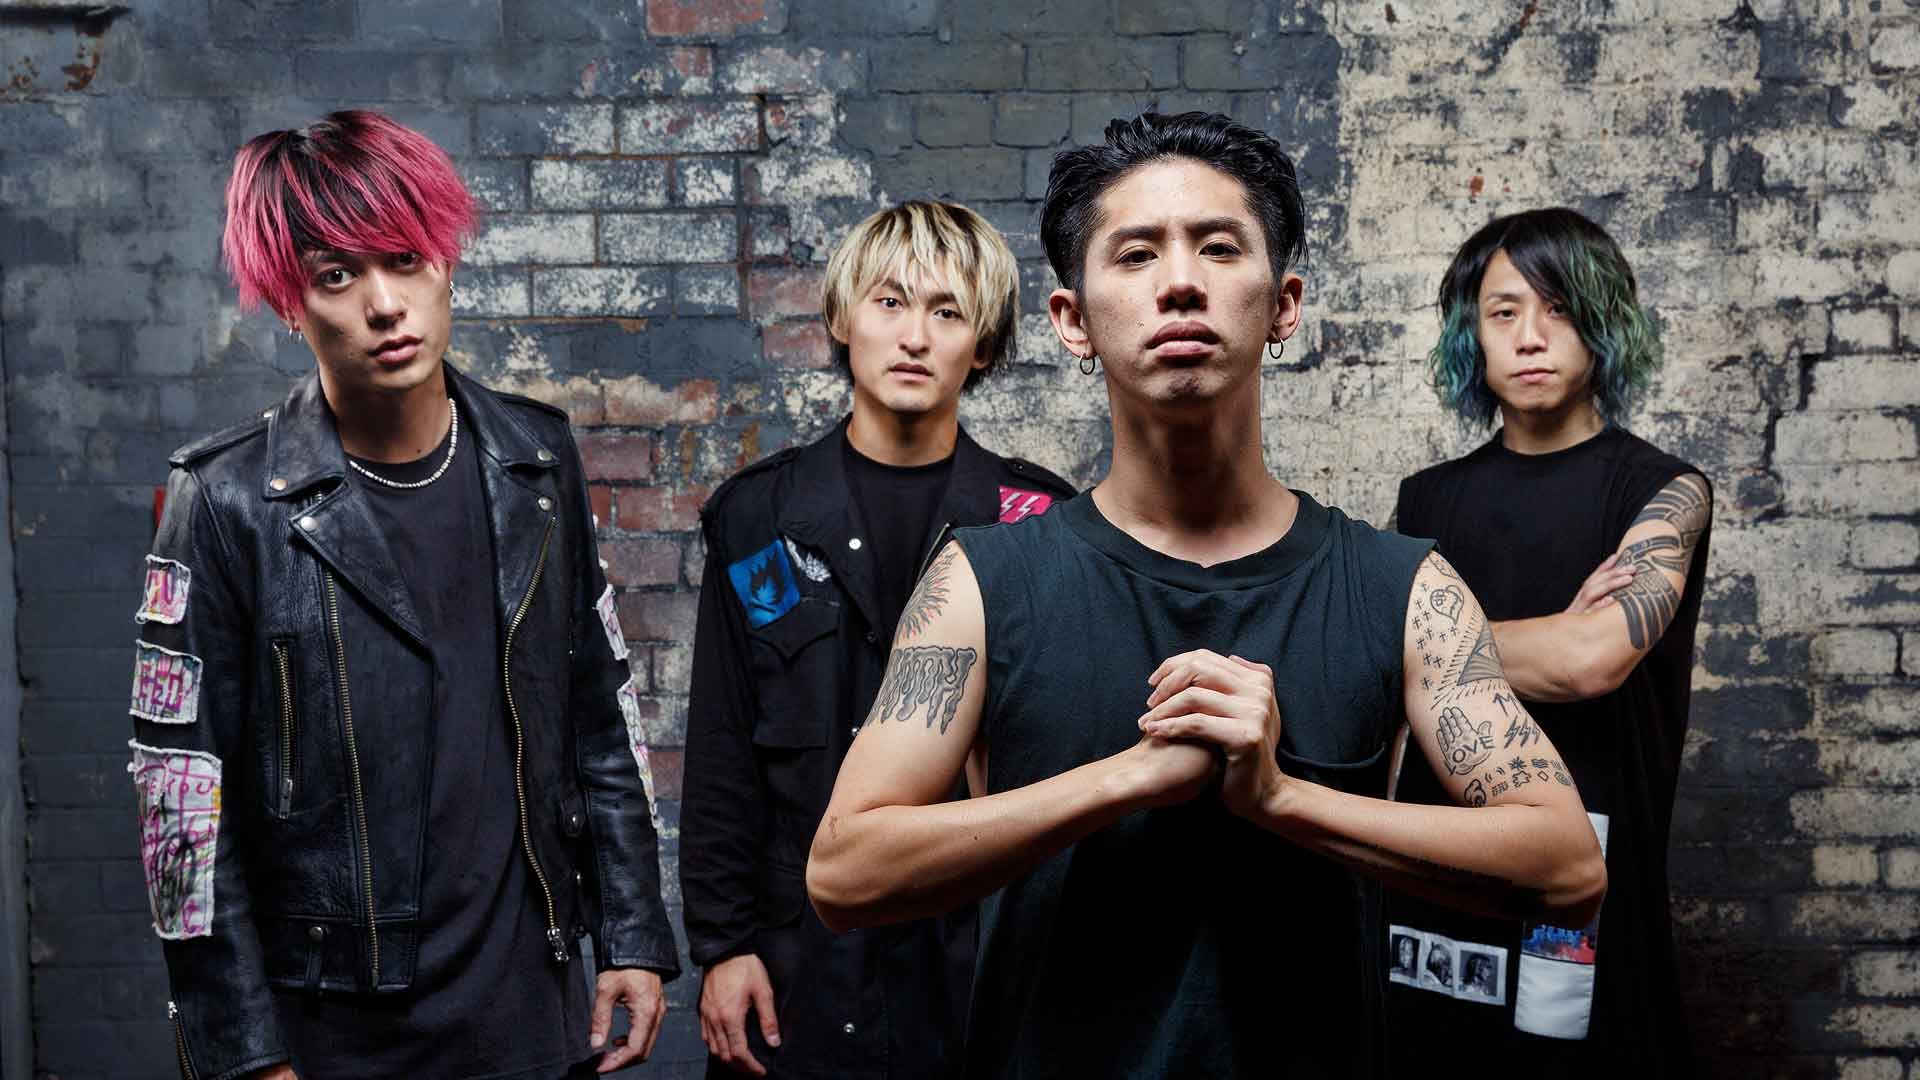 One Ok Rock Wallpapers 65 Images